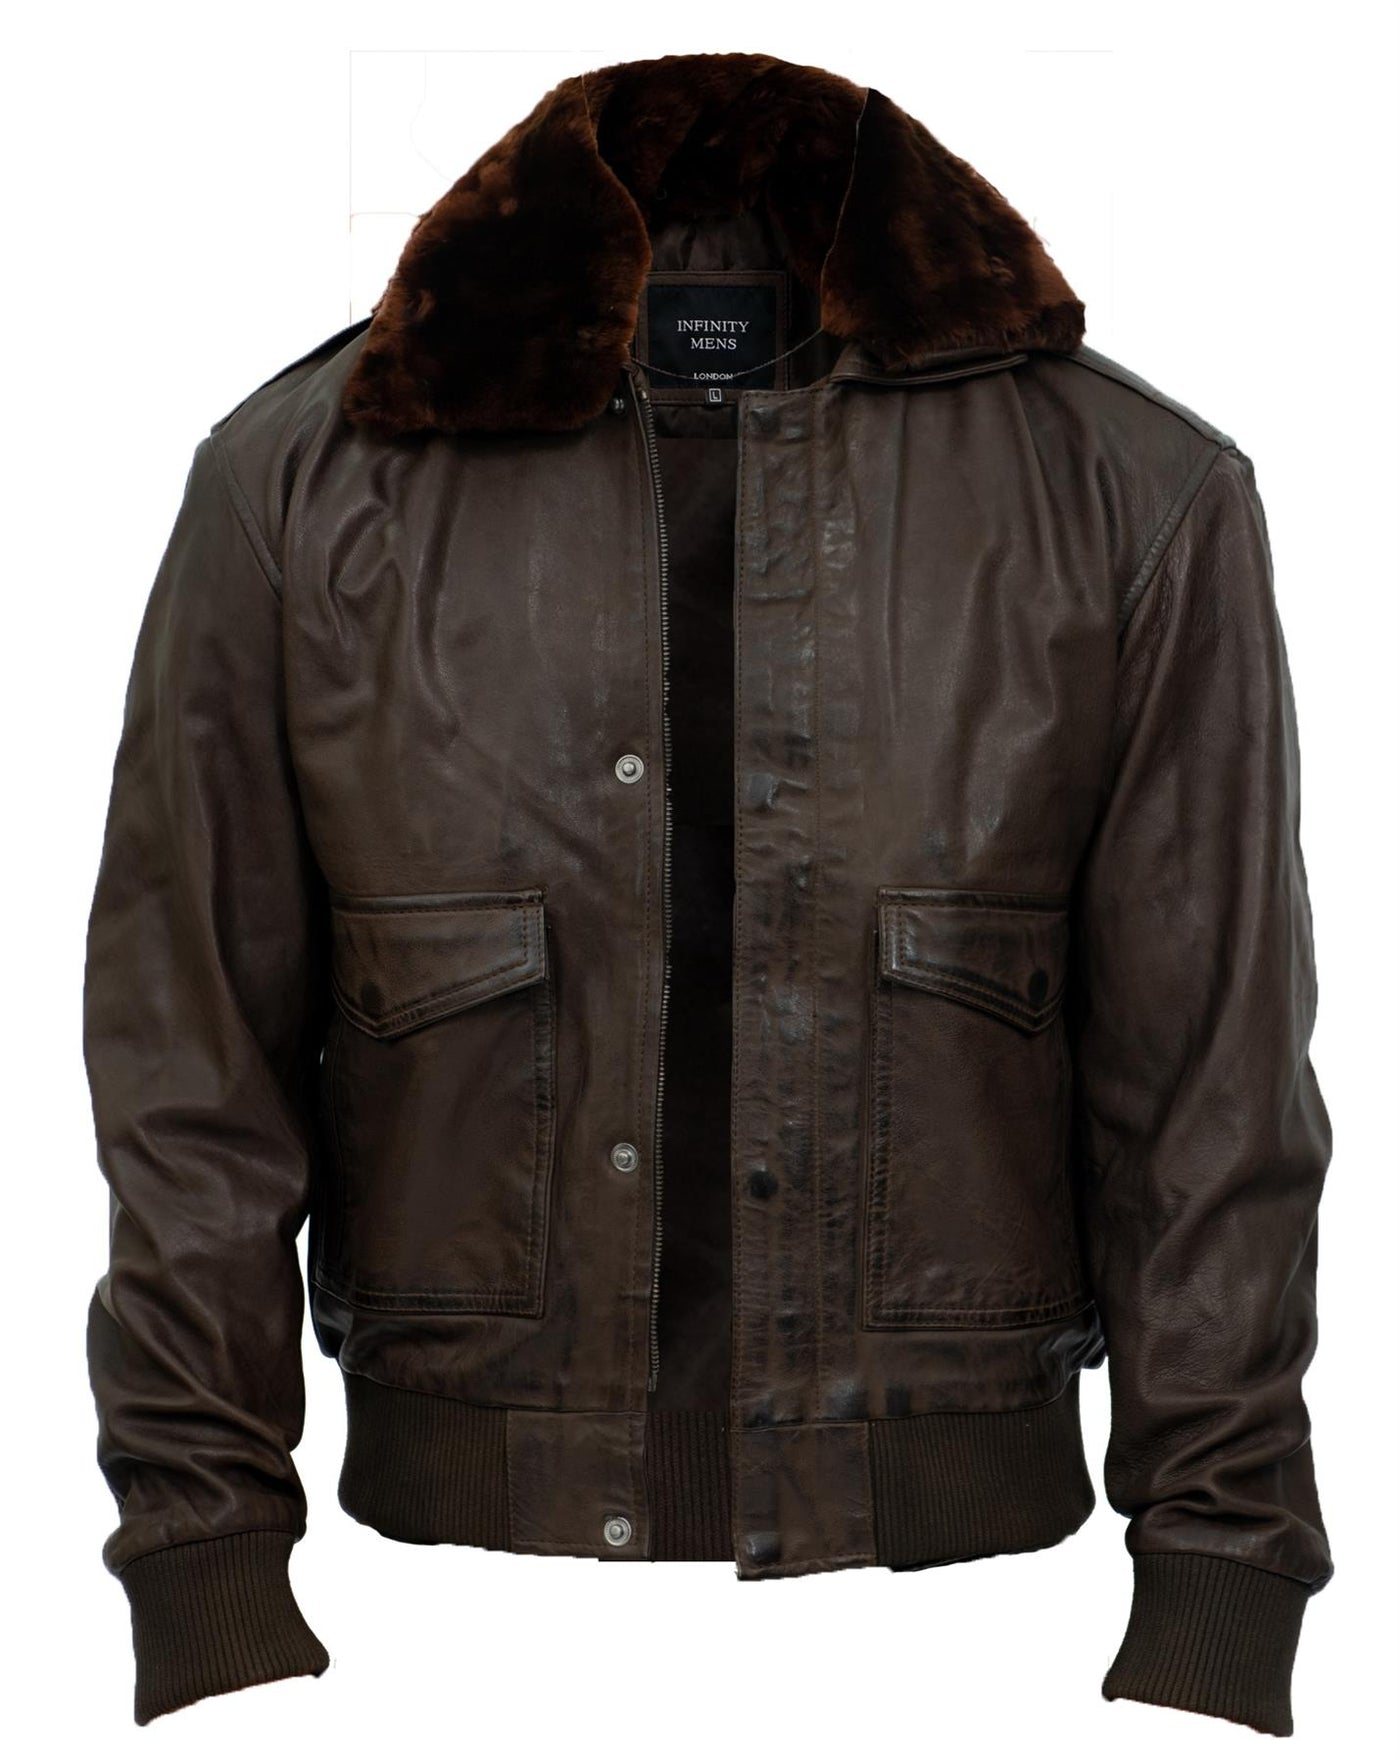 Men's Air Force A2 Brown Aviator Leather Bomber Jacket-Sao Paulo